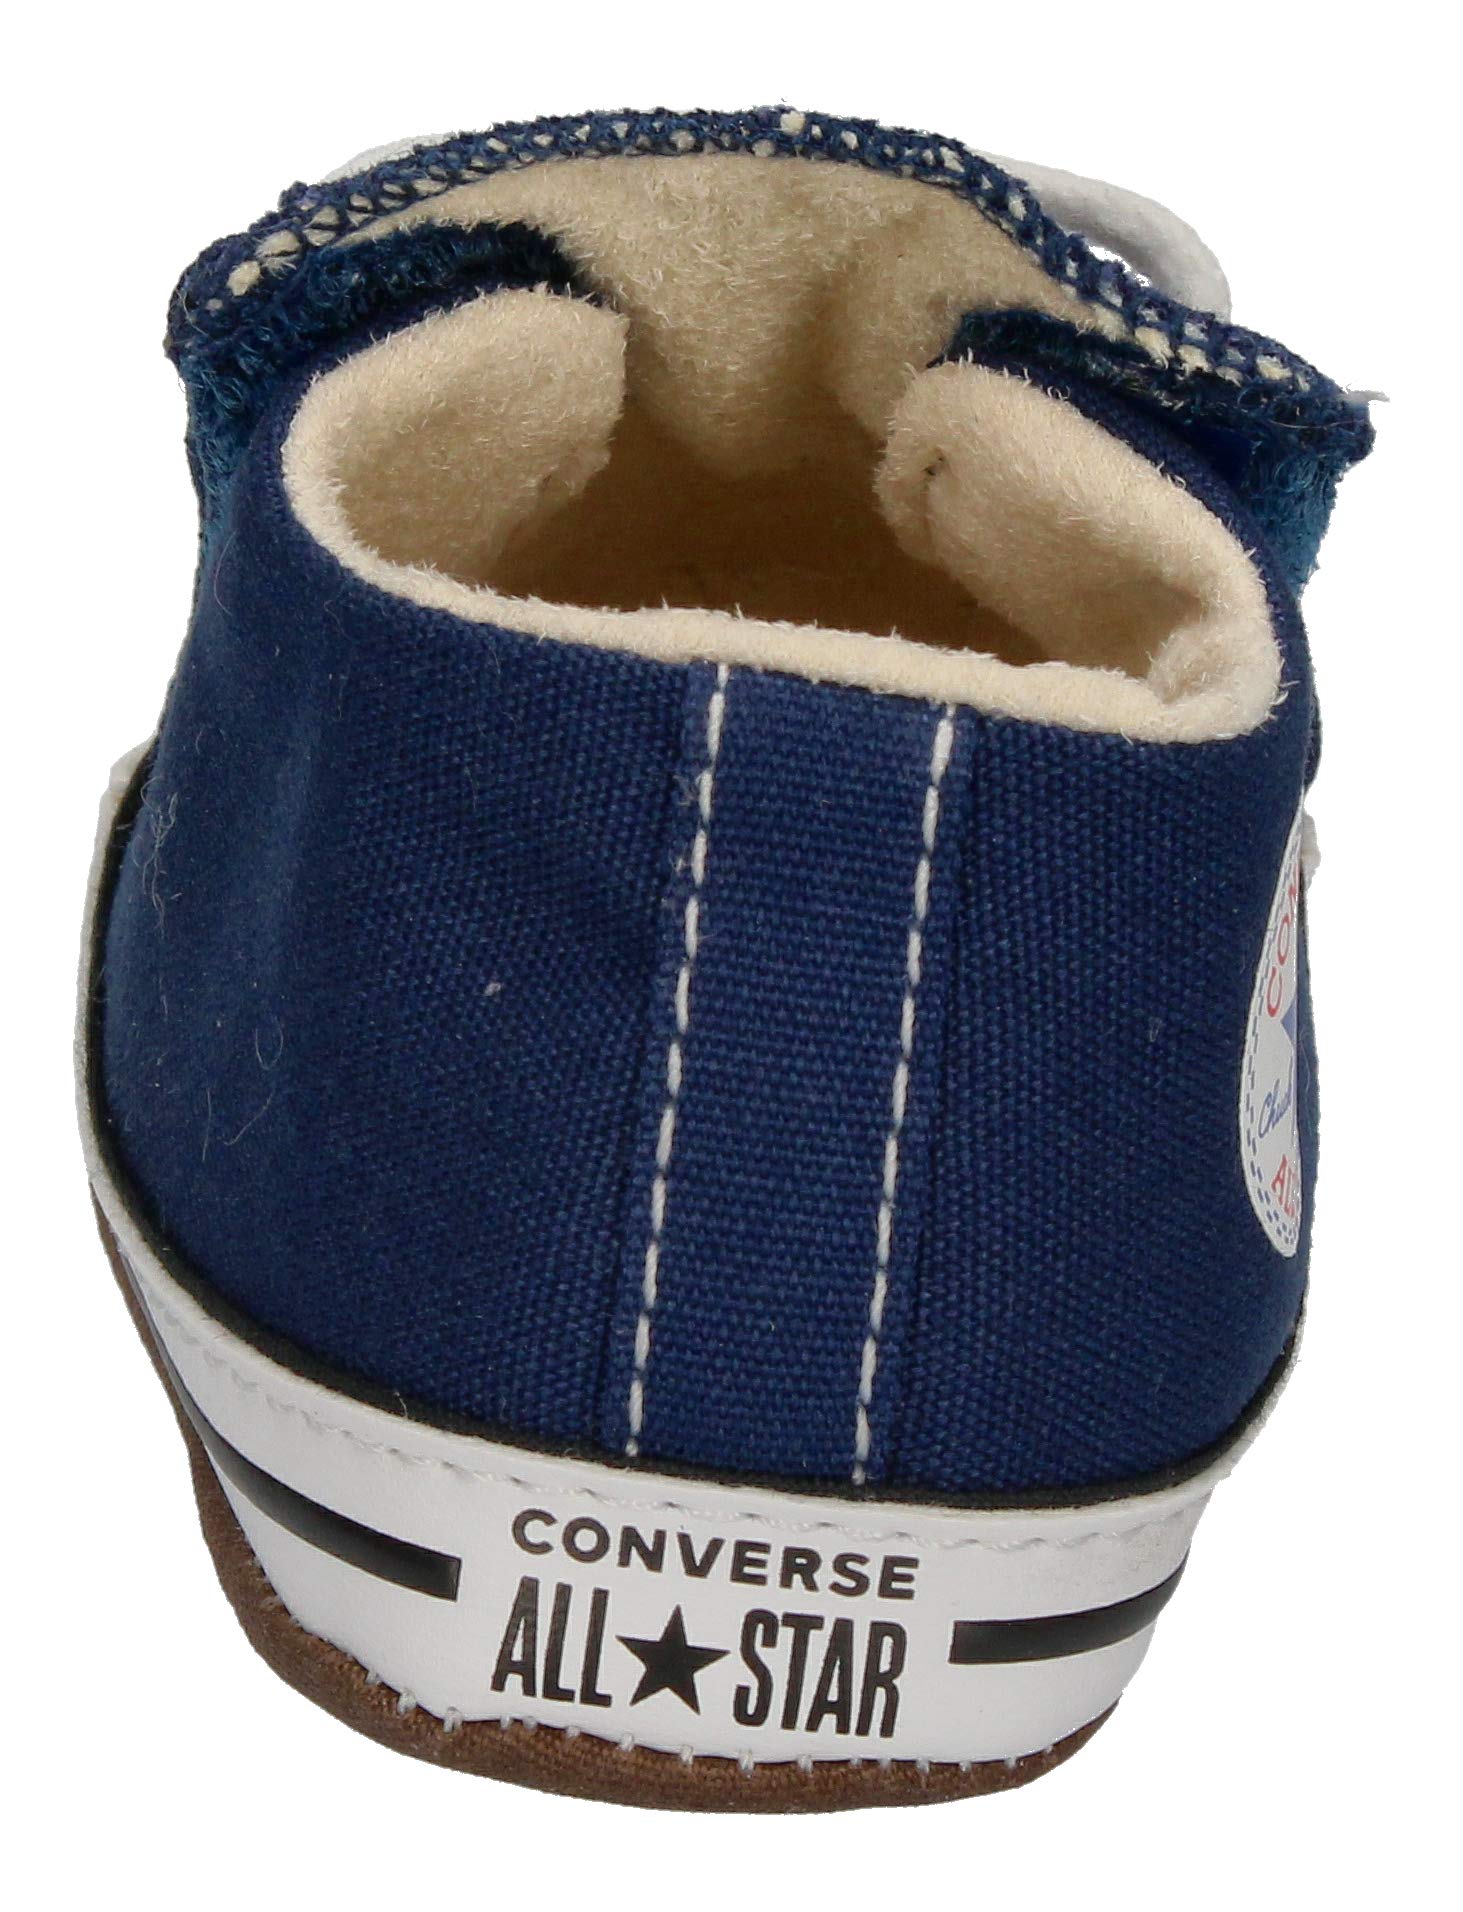 Converse Unisex-Child Chuck Taylor All Star Cribster Canvas Color Sneaker